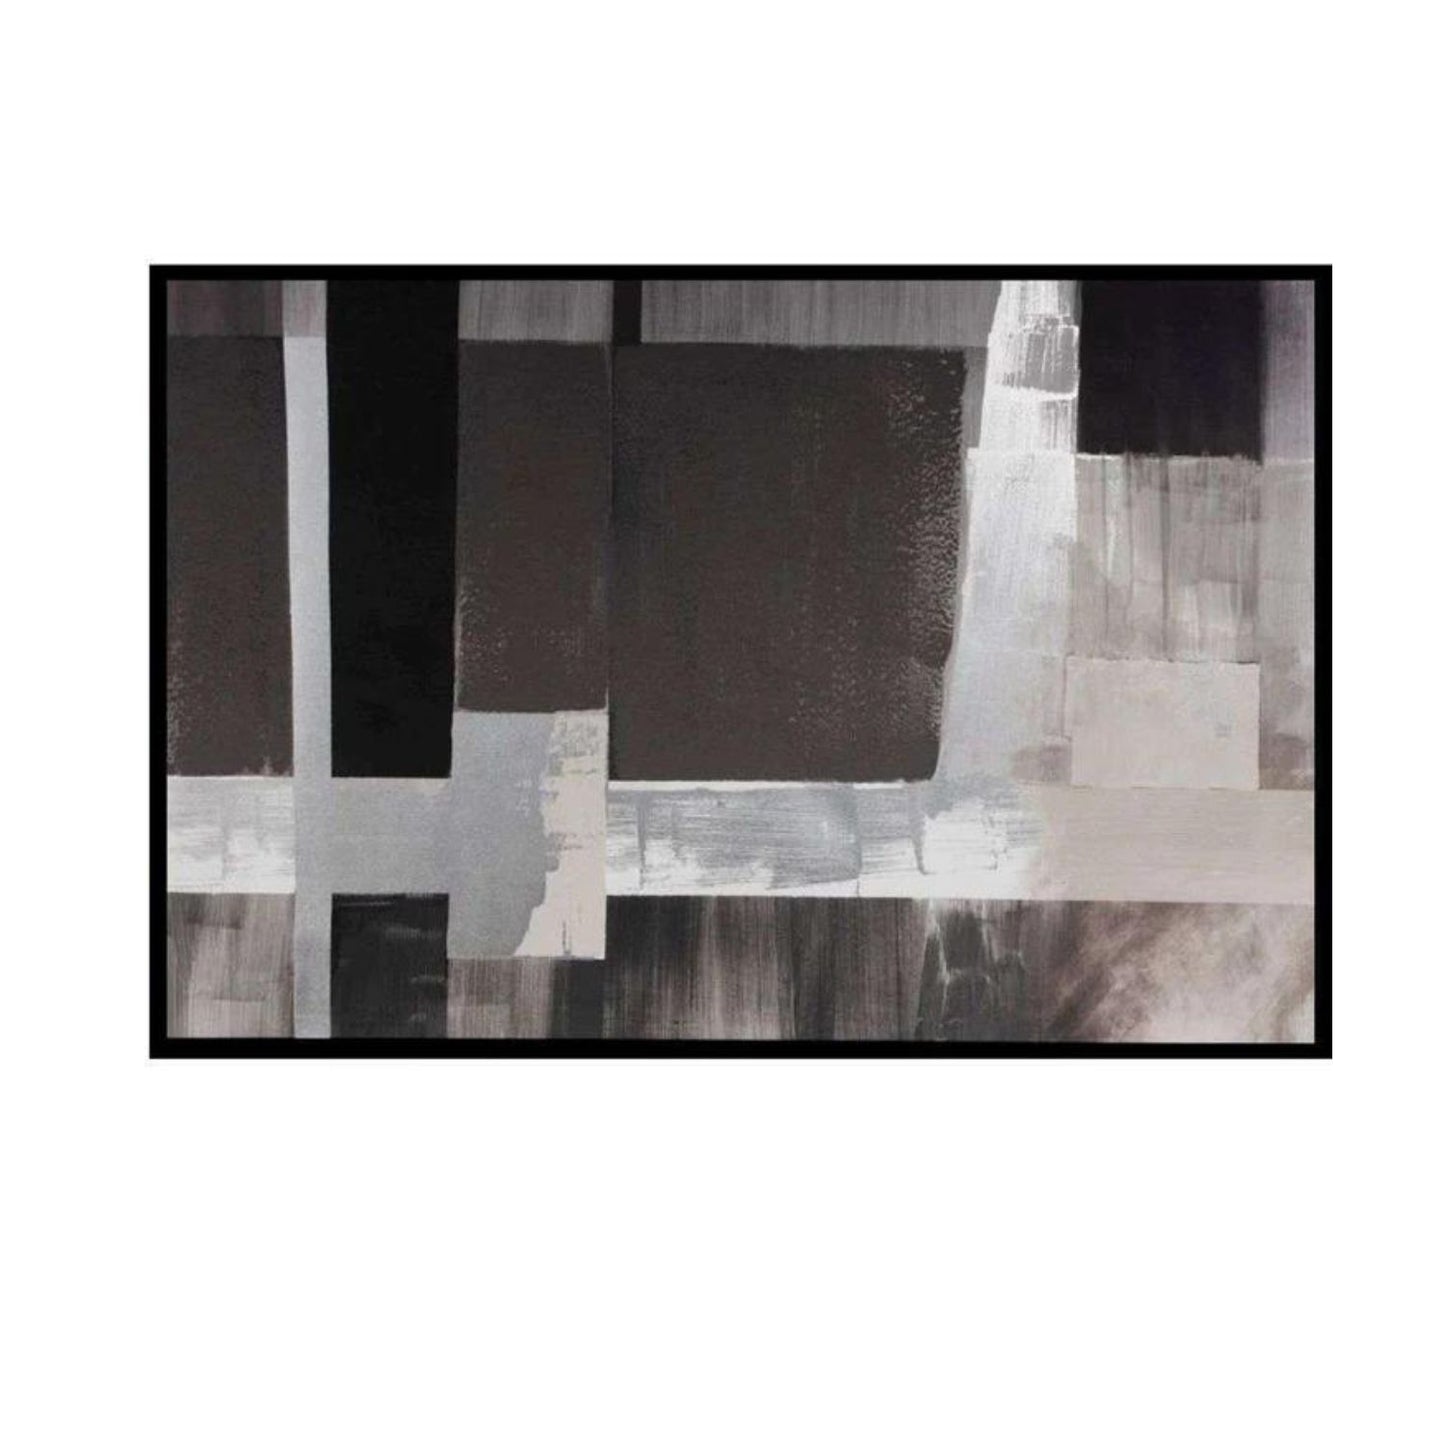 Foil abstract rectangular canvas in black, brown and white